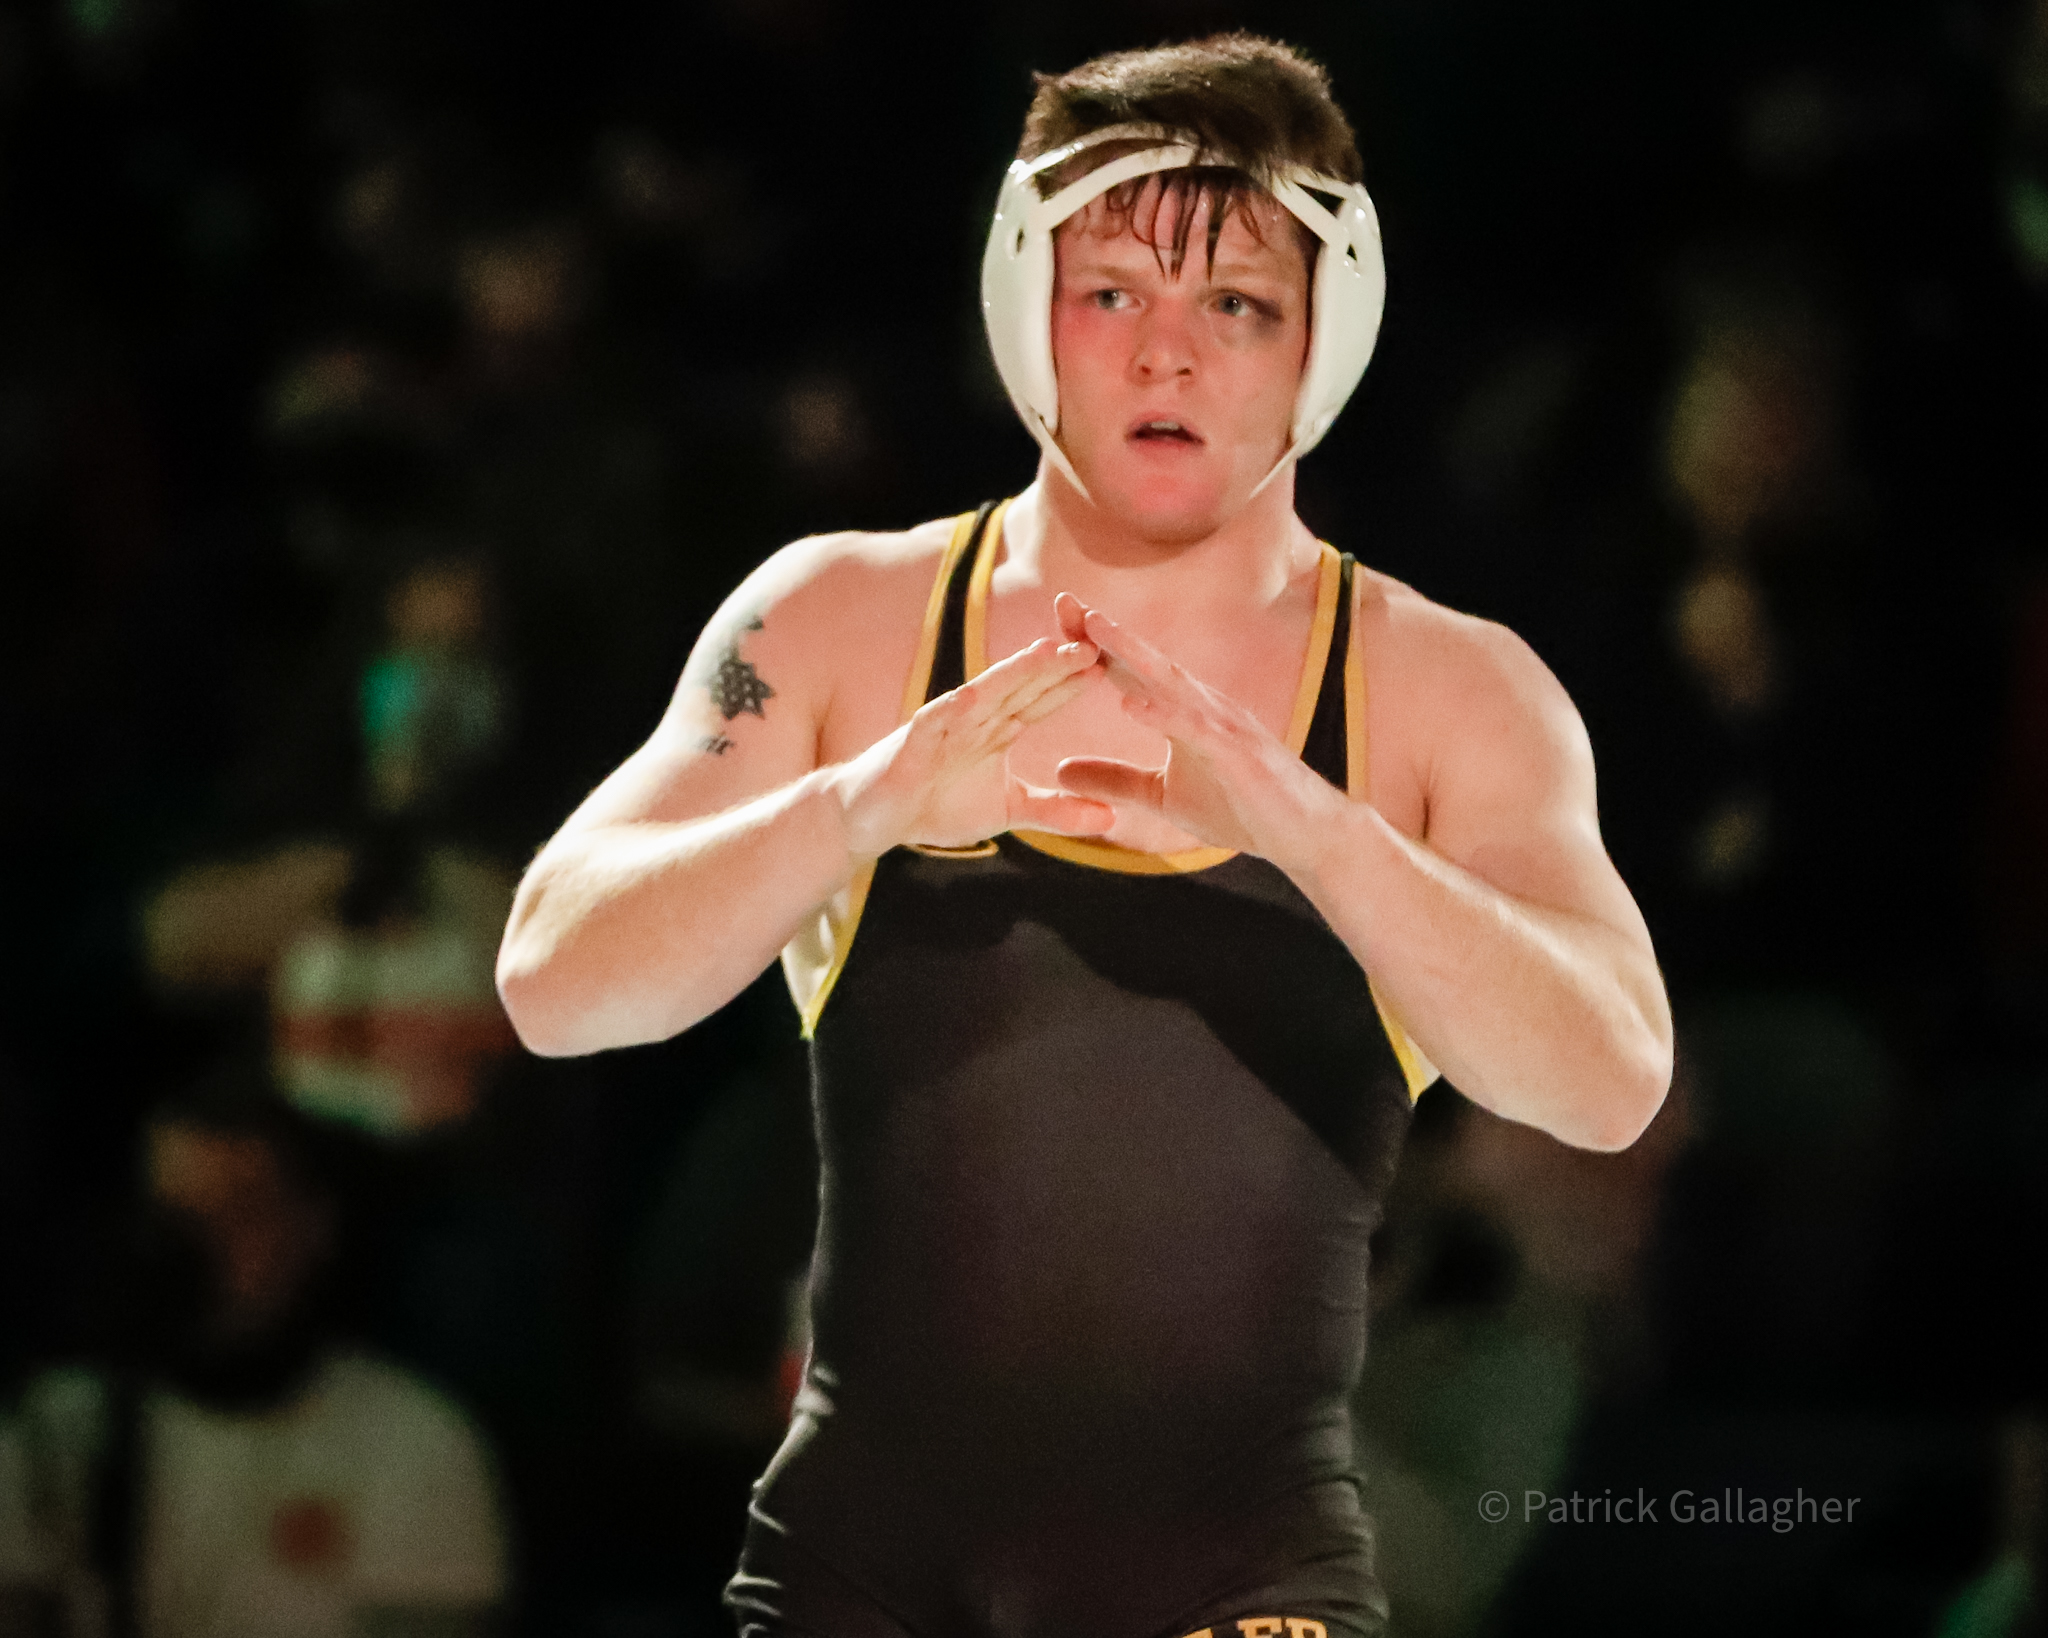 St. Edward Wrestling: Four pins in succession by Evan Bennett, Paddy  Gallagher, Luke Geog and Hudson Hightower break the backbone of Perry,  Wyatt Richter in his first match of the season, Ryan